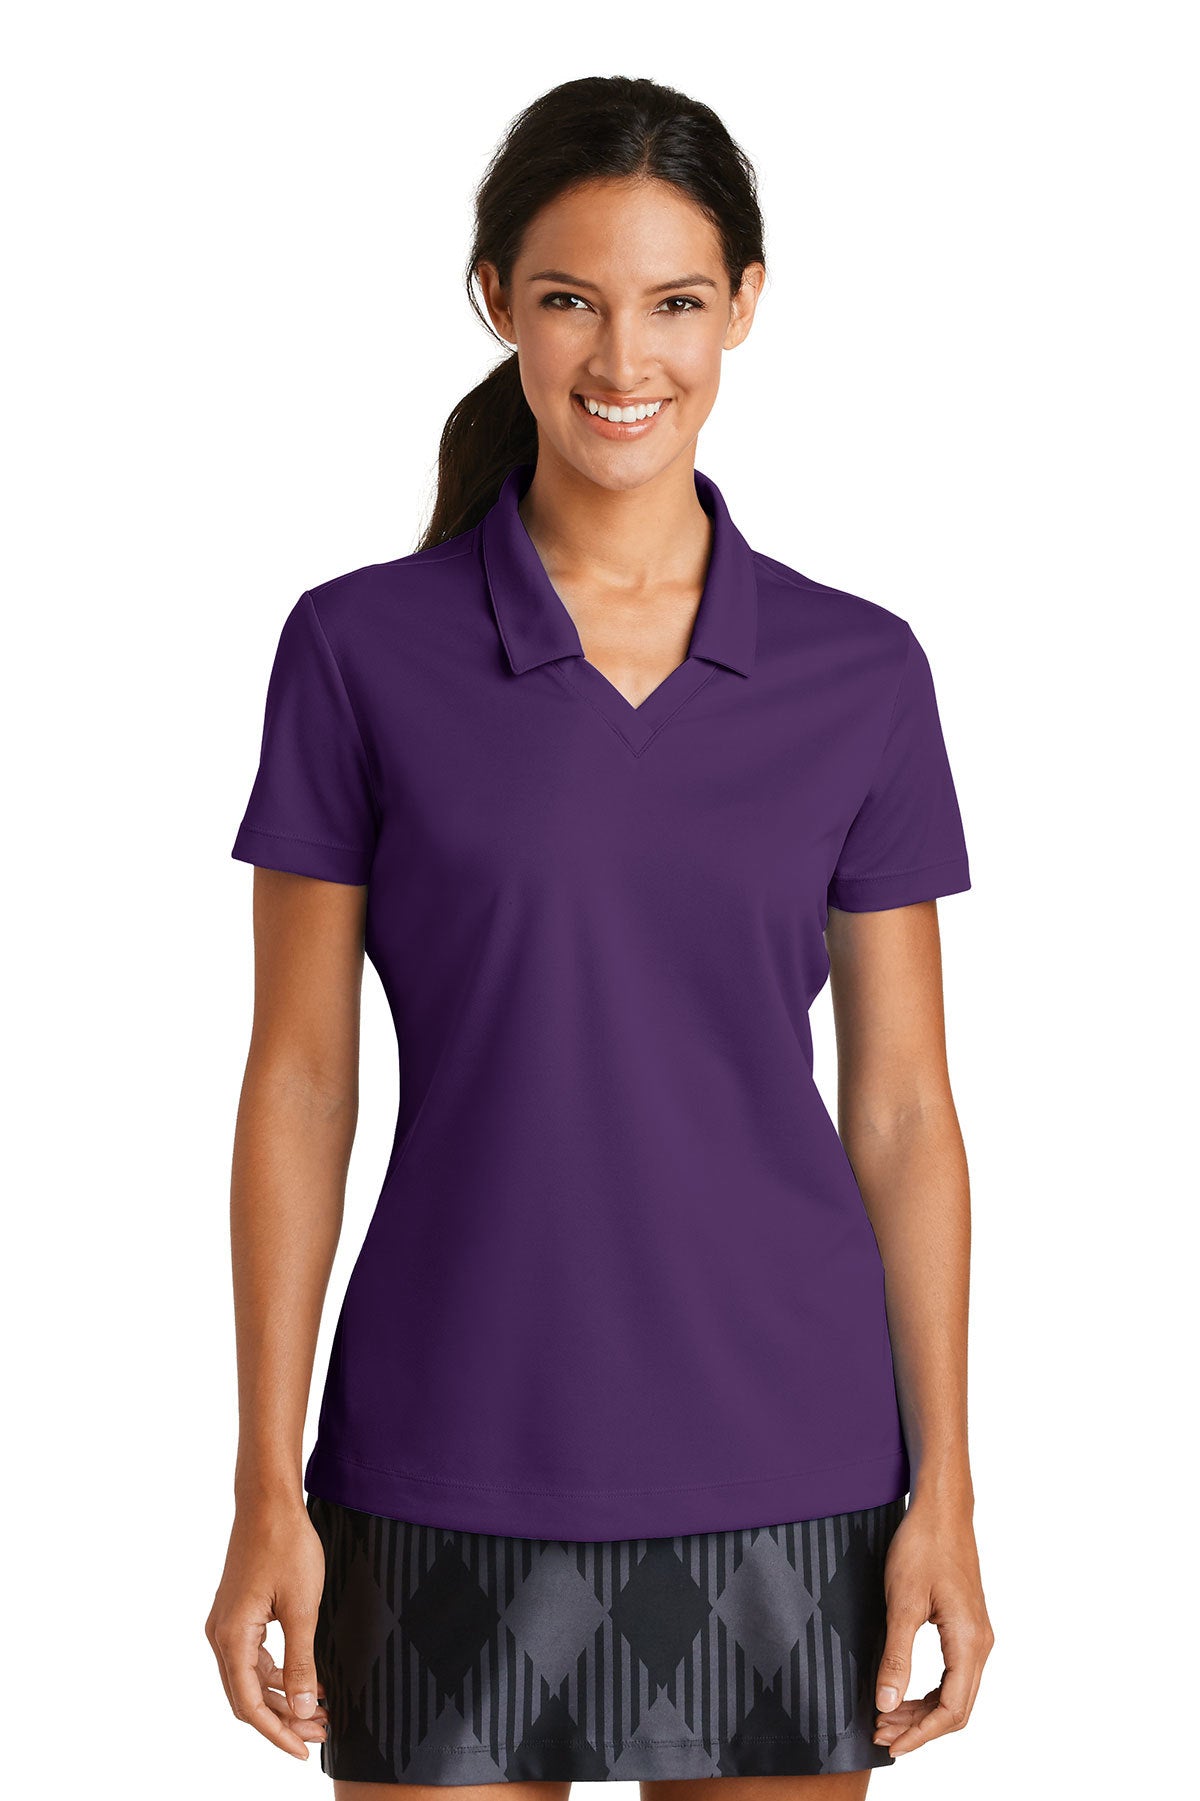 LL Lake Image (Embroidered) Nike Women's Golf Polo